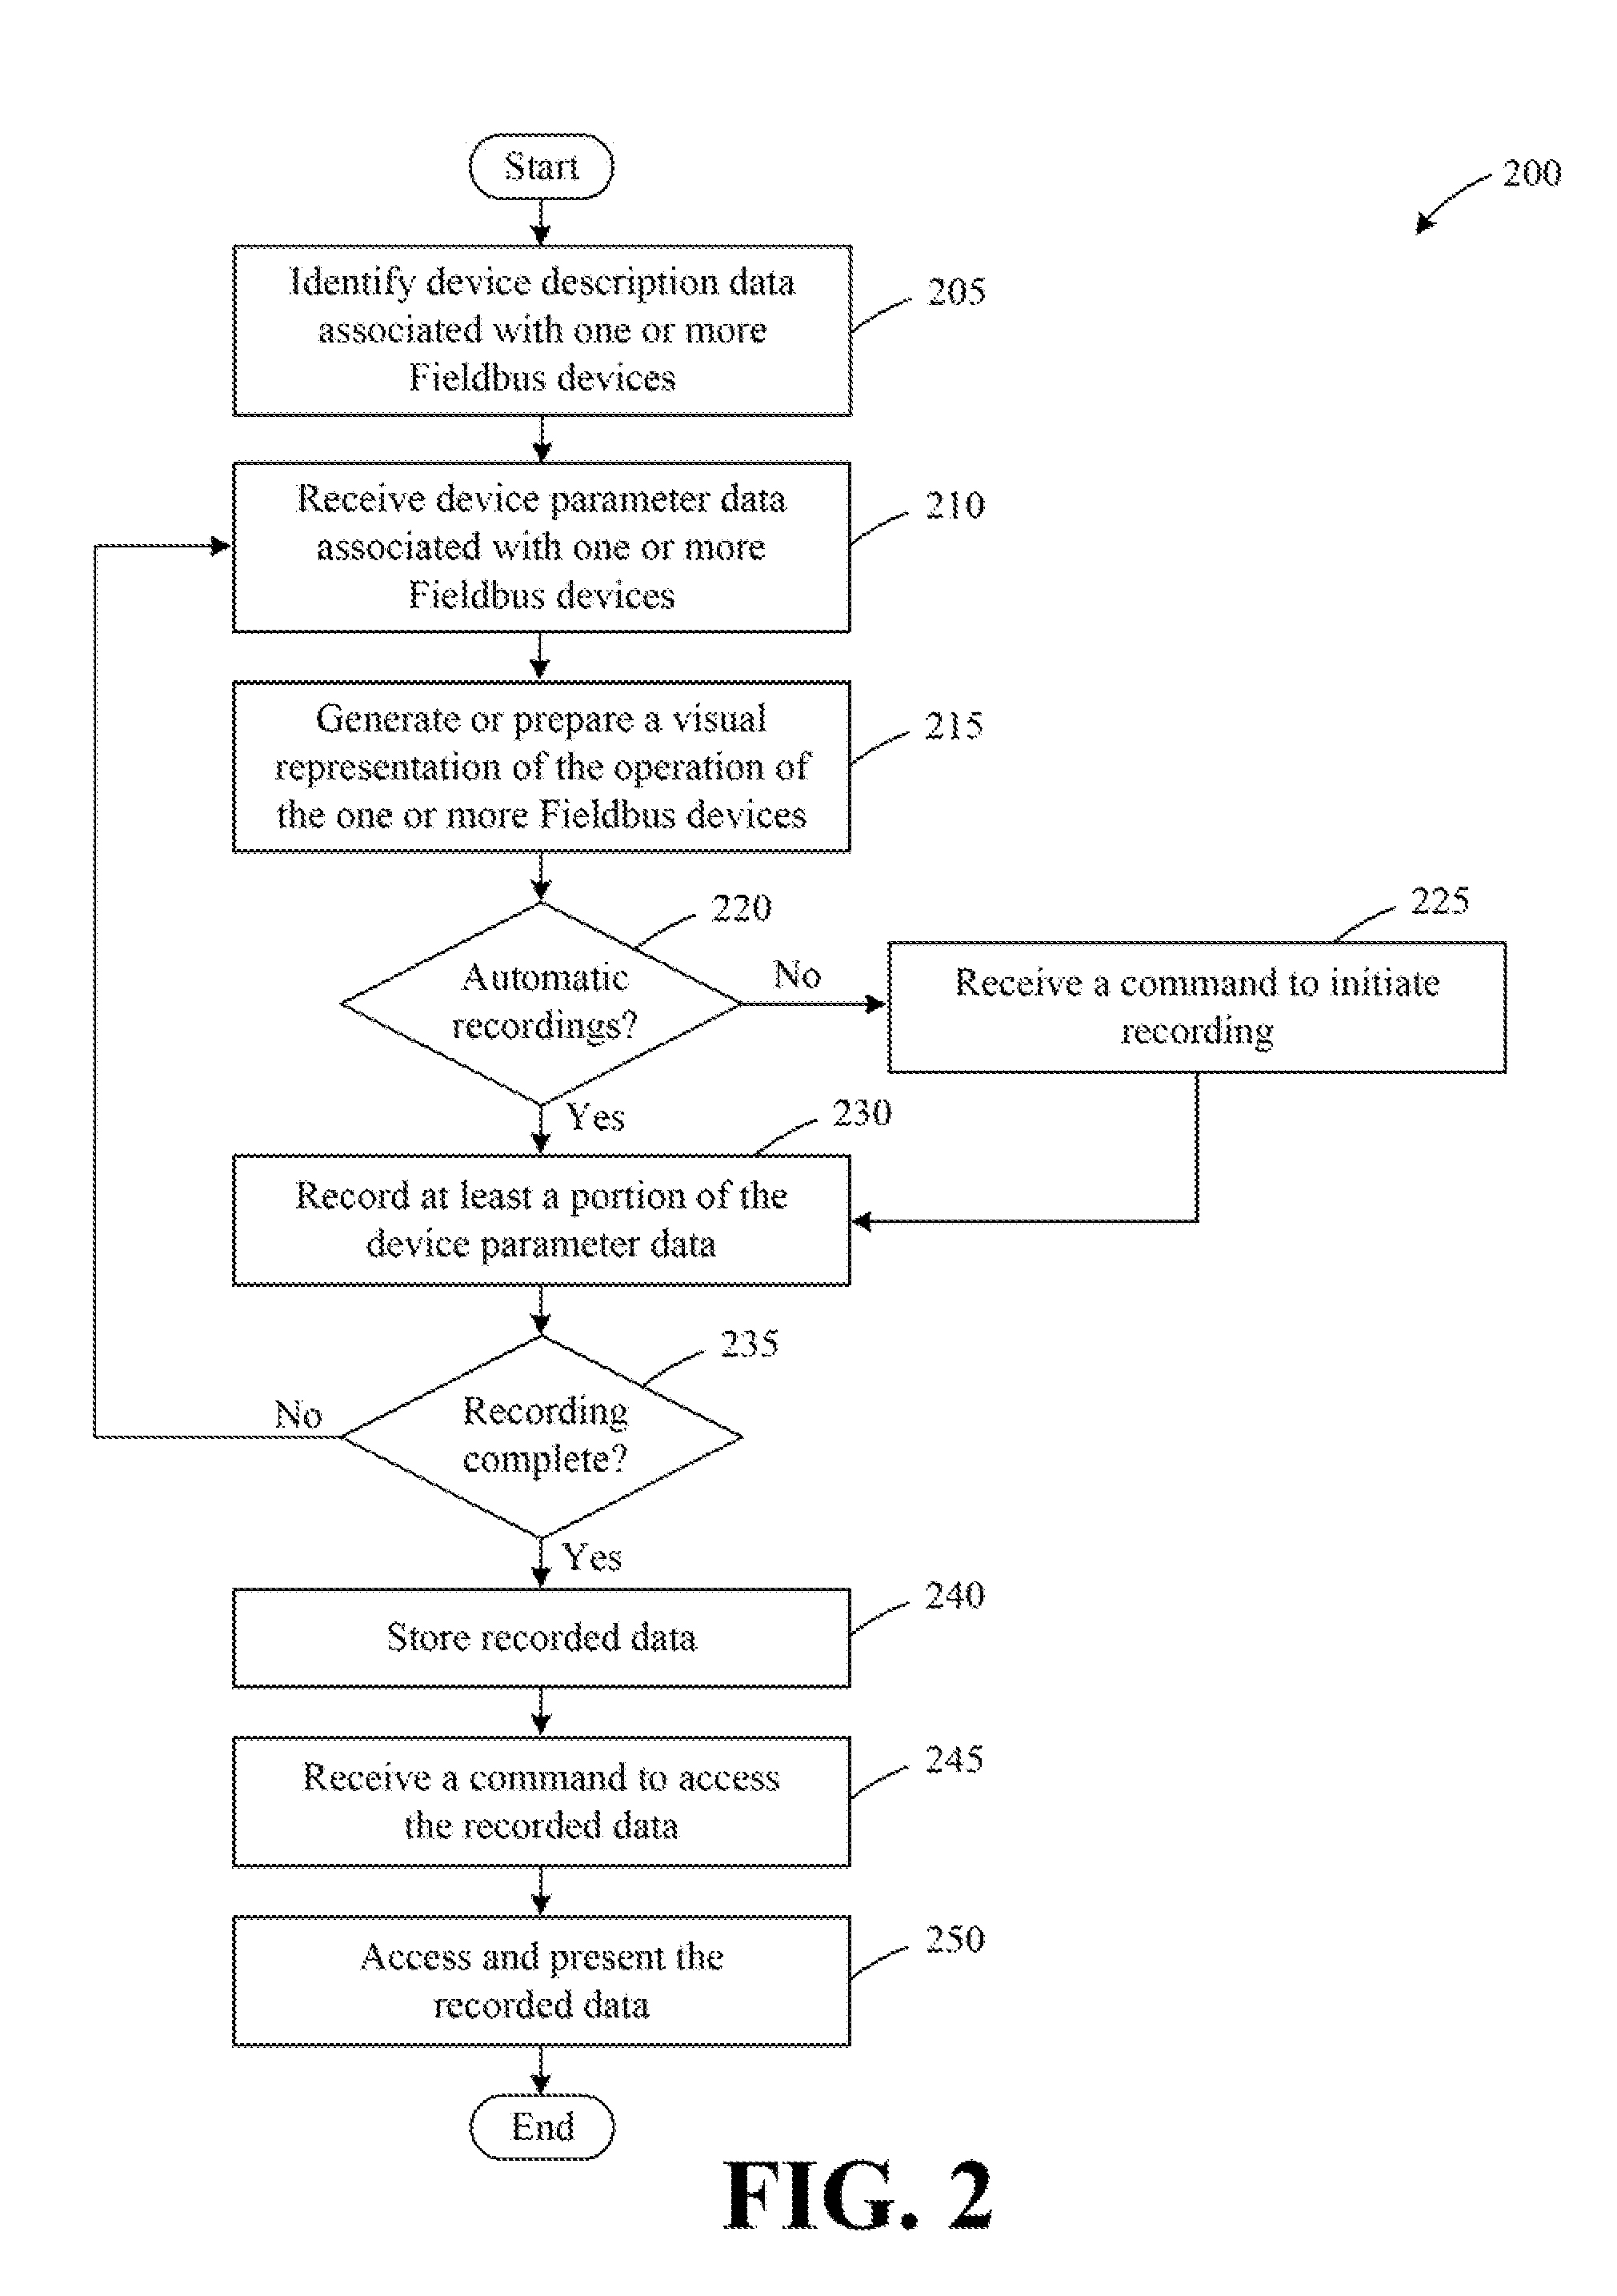 Systems and methods for recording data associated with the operation of foundation fieldbus devices